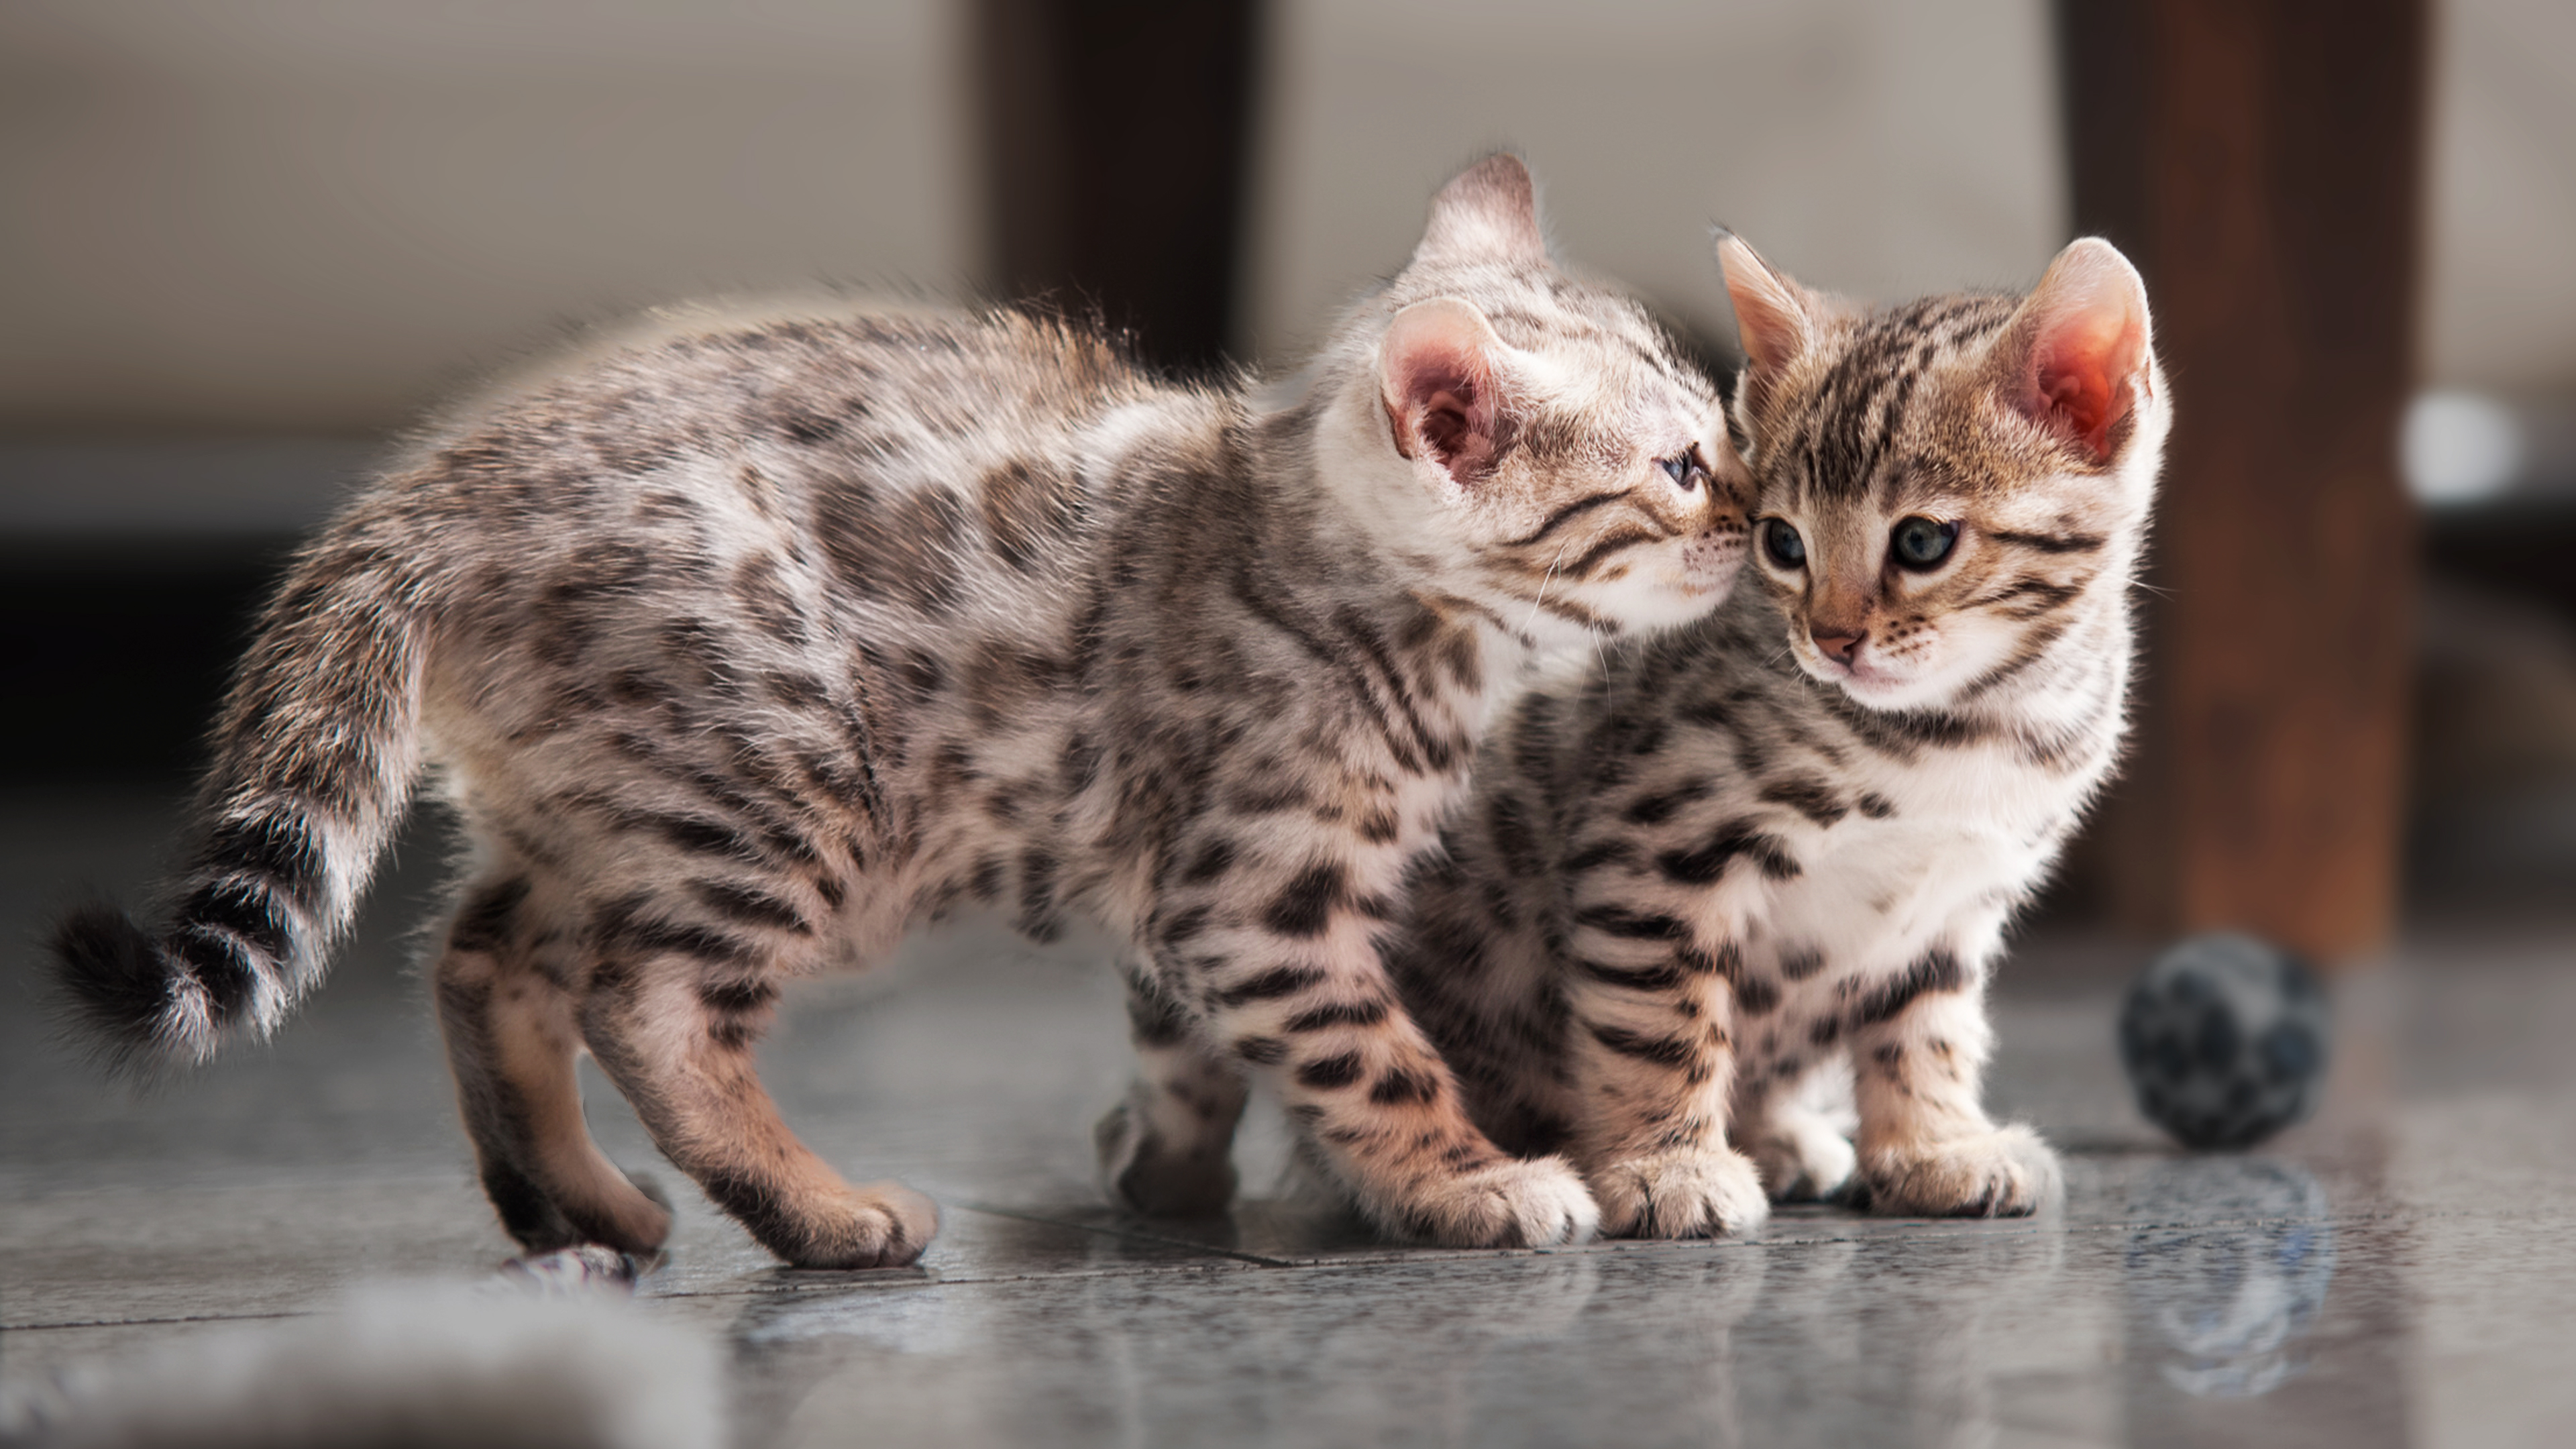 Bengal kittens playing together indoors